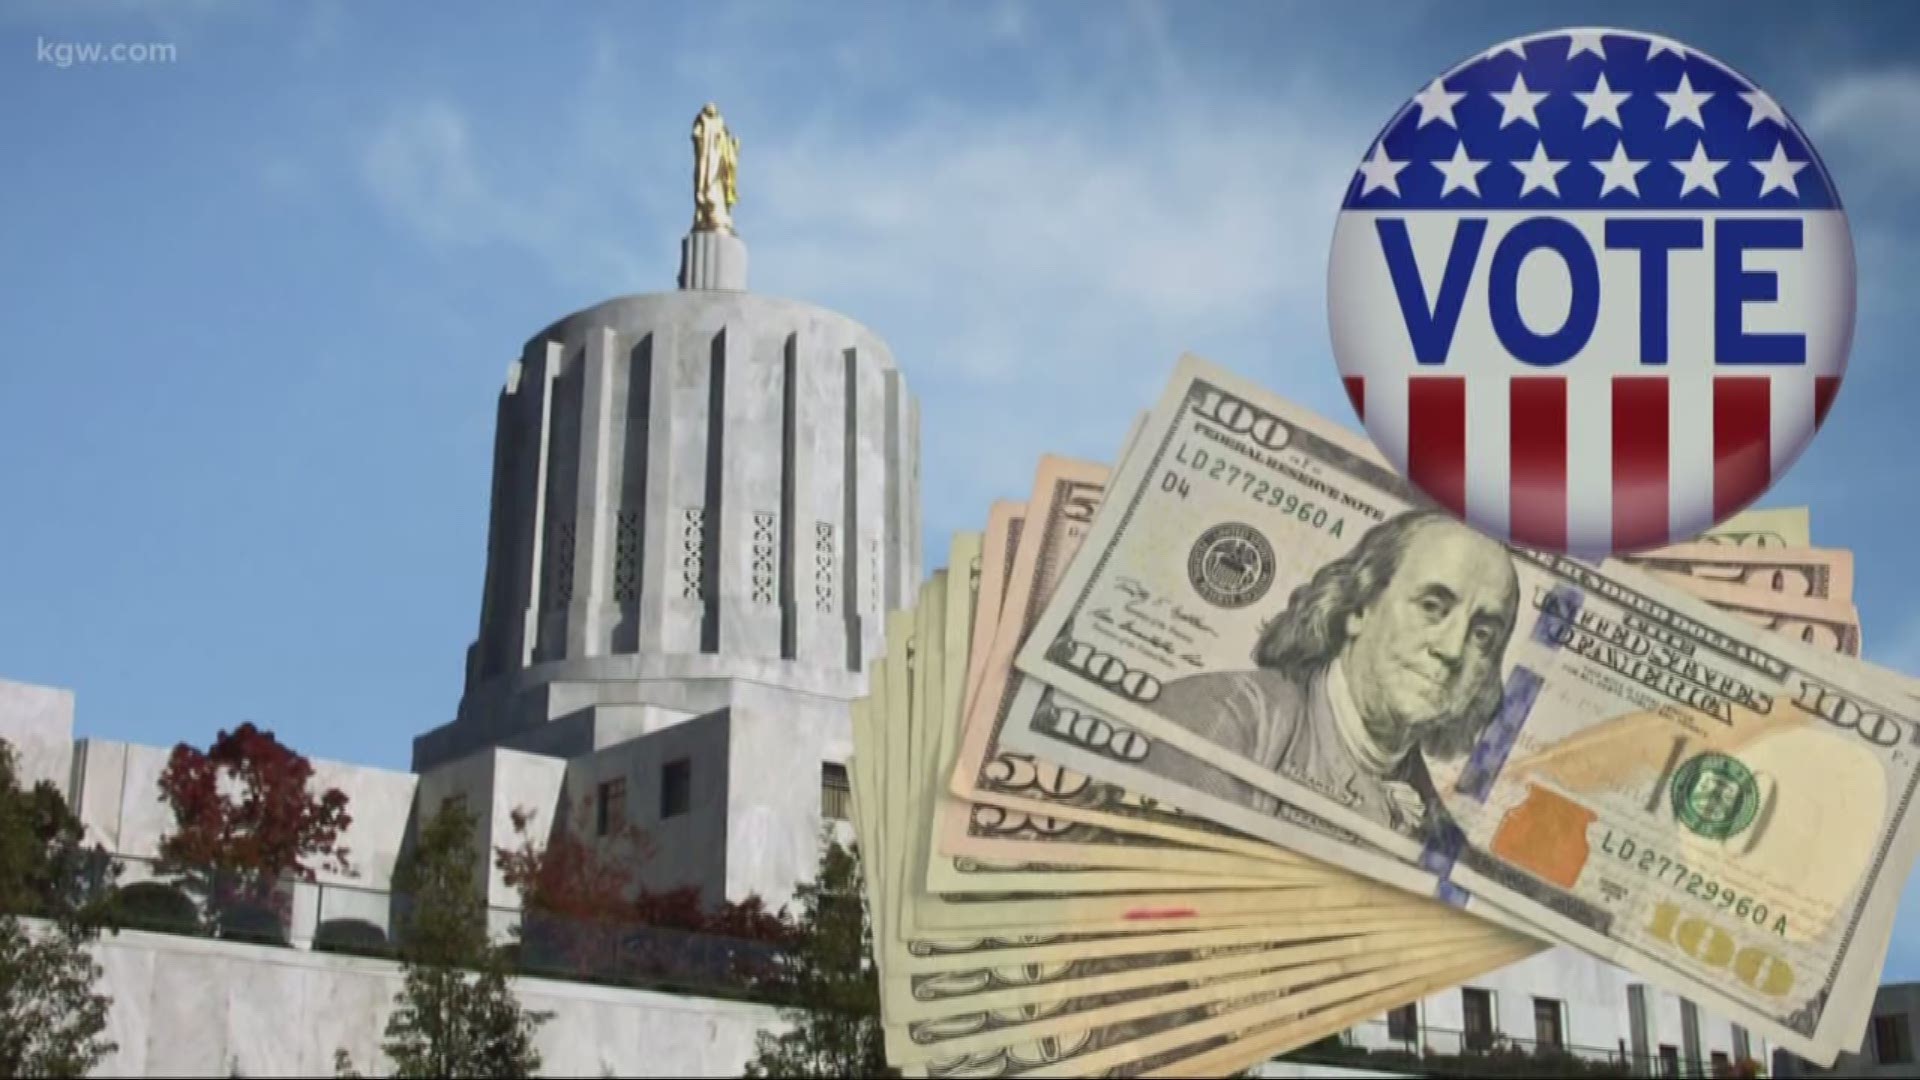 The Oregon Supreme Court just ruled that campaign contribution limits are now allowed -- but there's still a lot of details that need to be worked out.